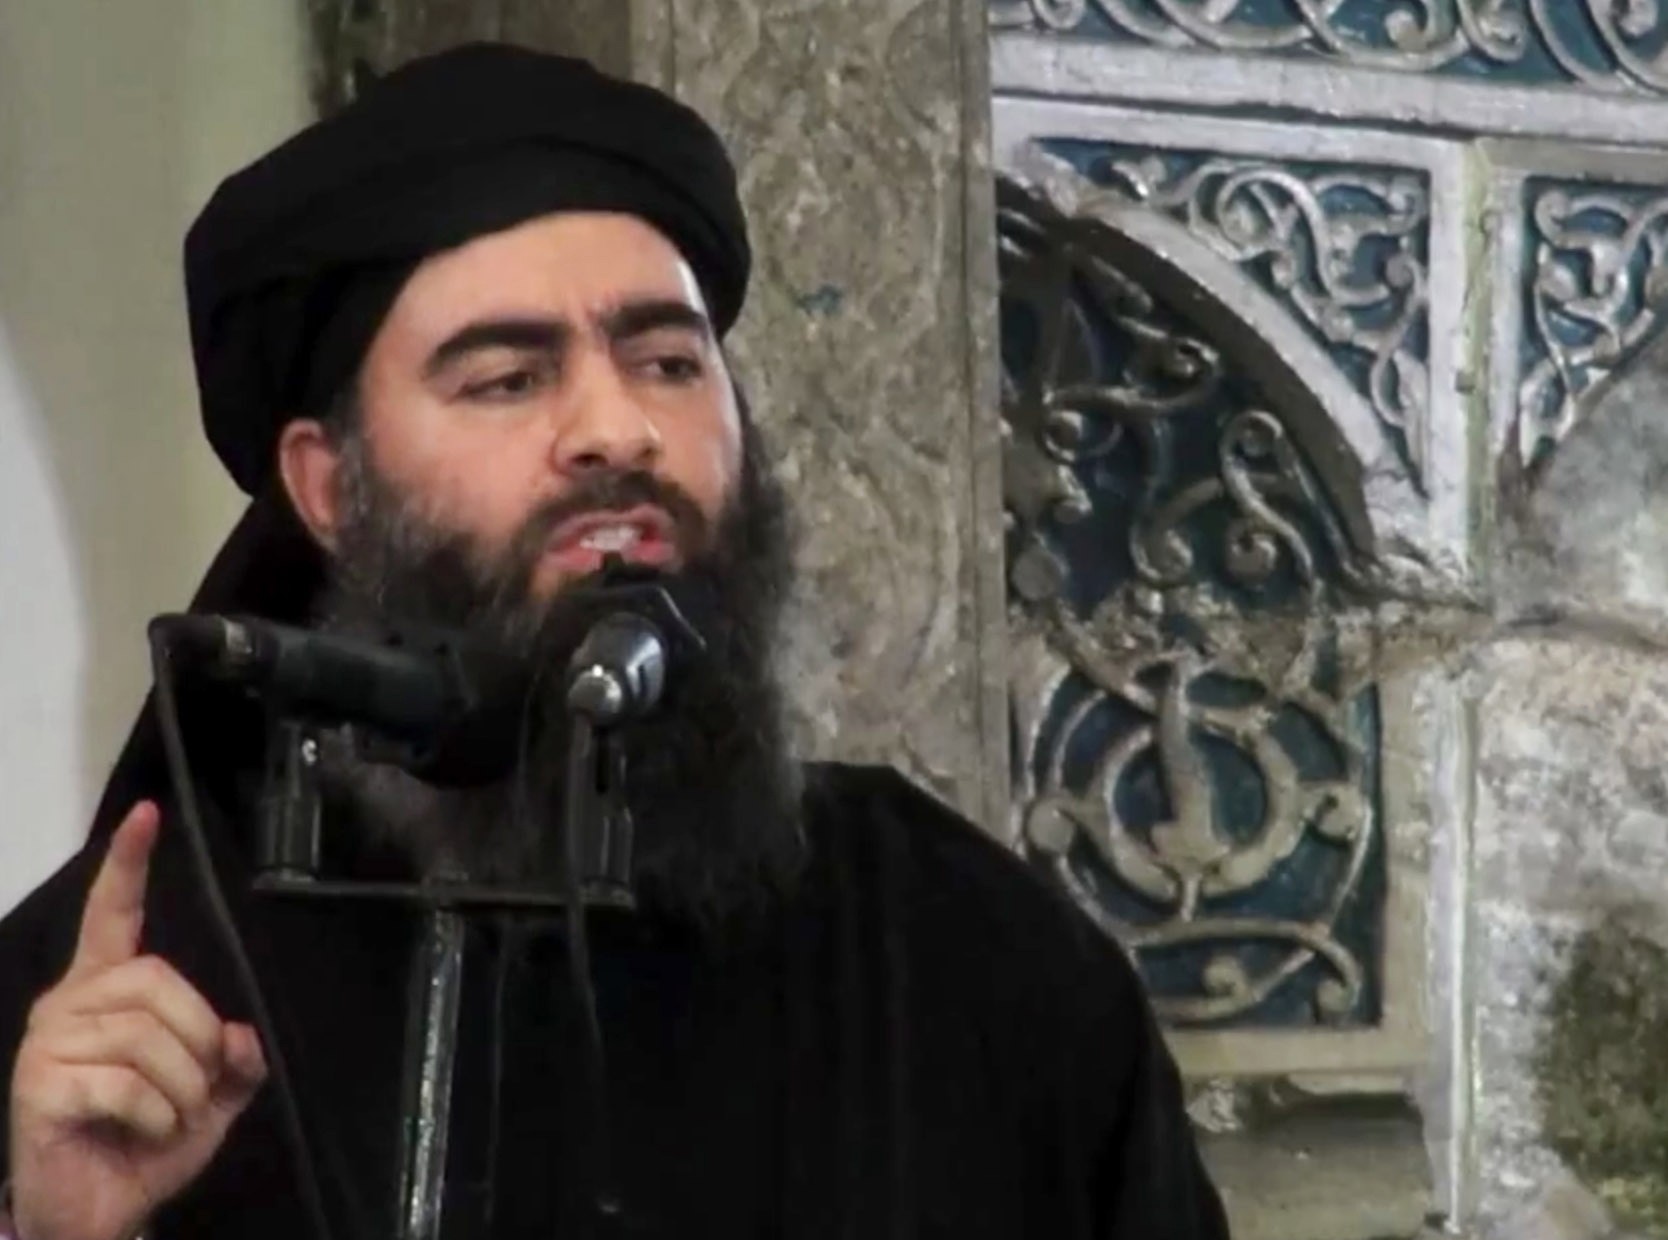 Abu Bakr al-Baghdadi delivers a sermon at a mosque in Iraq, in a video released by Isis in September 2017. Photo: Militant video via AP